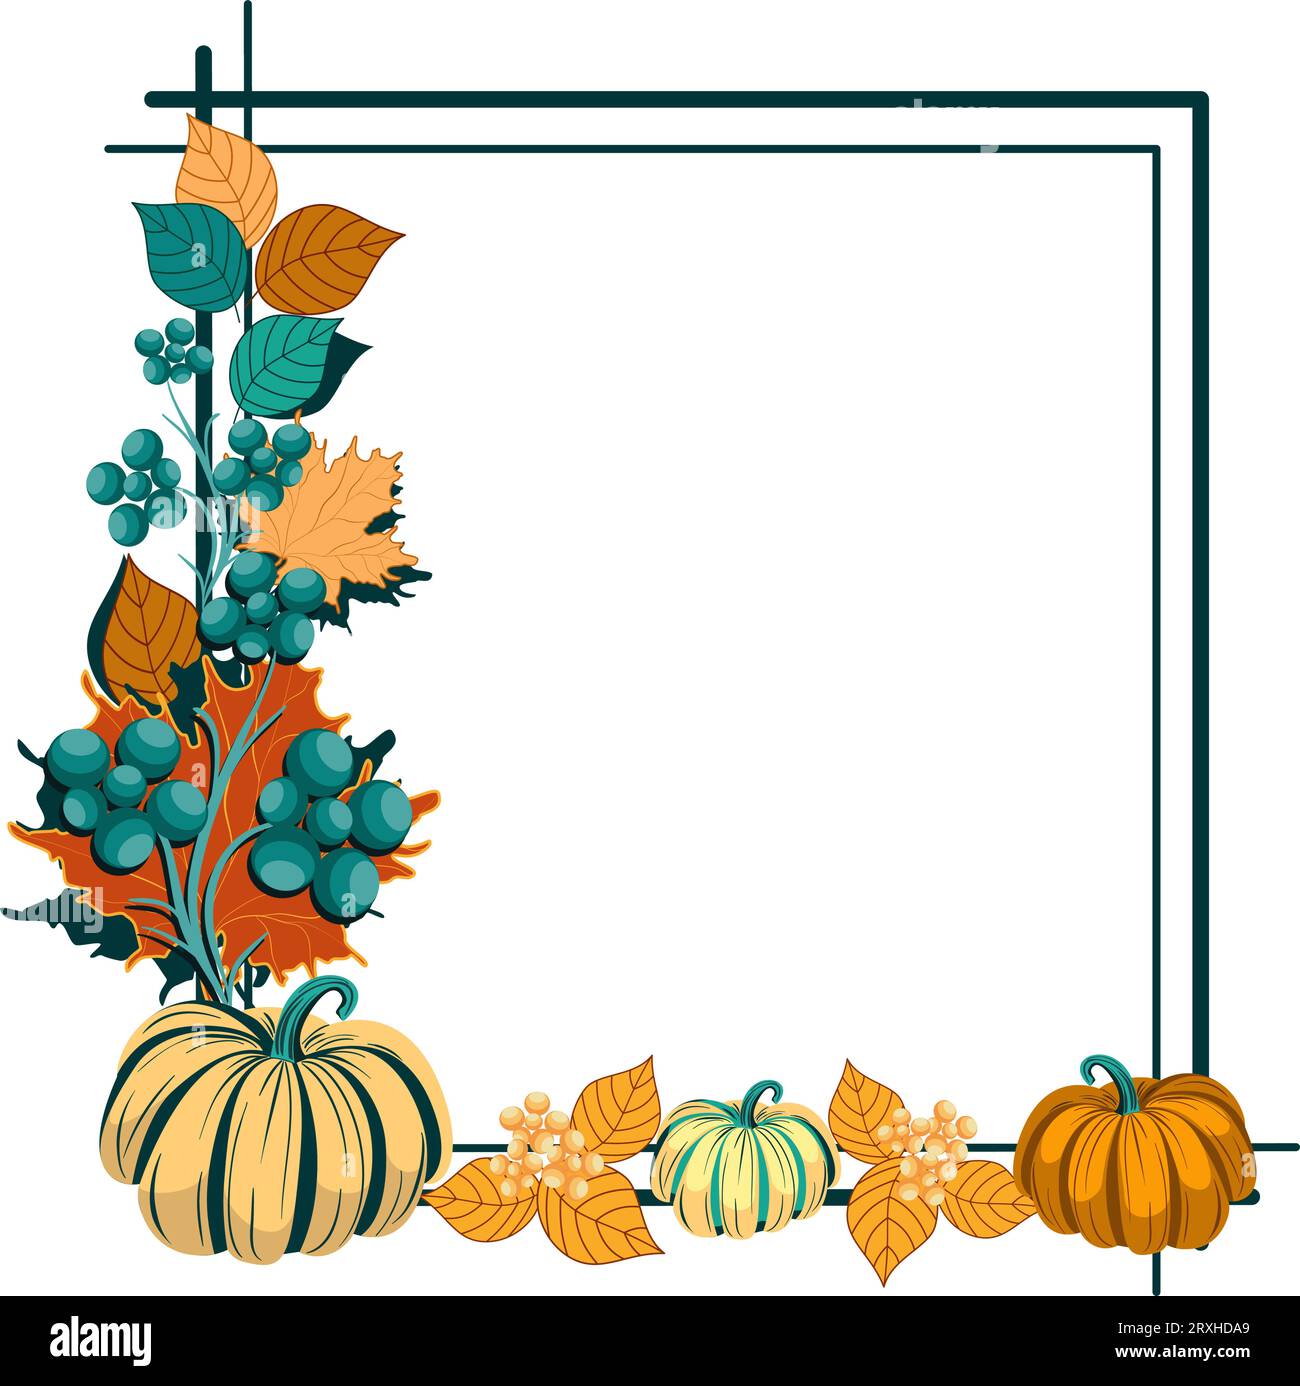 Autumn decorative frame with pumpkins and leaves vector illustration Stock Vector